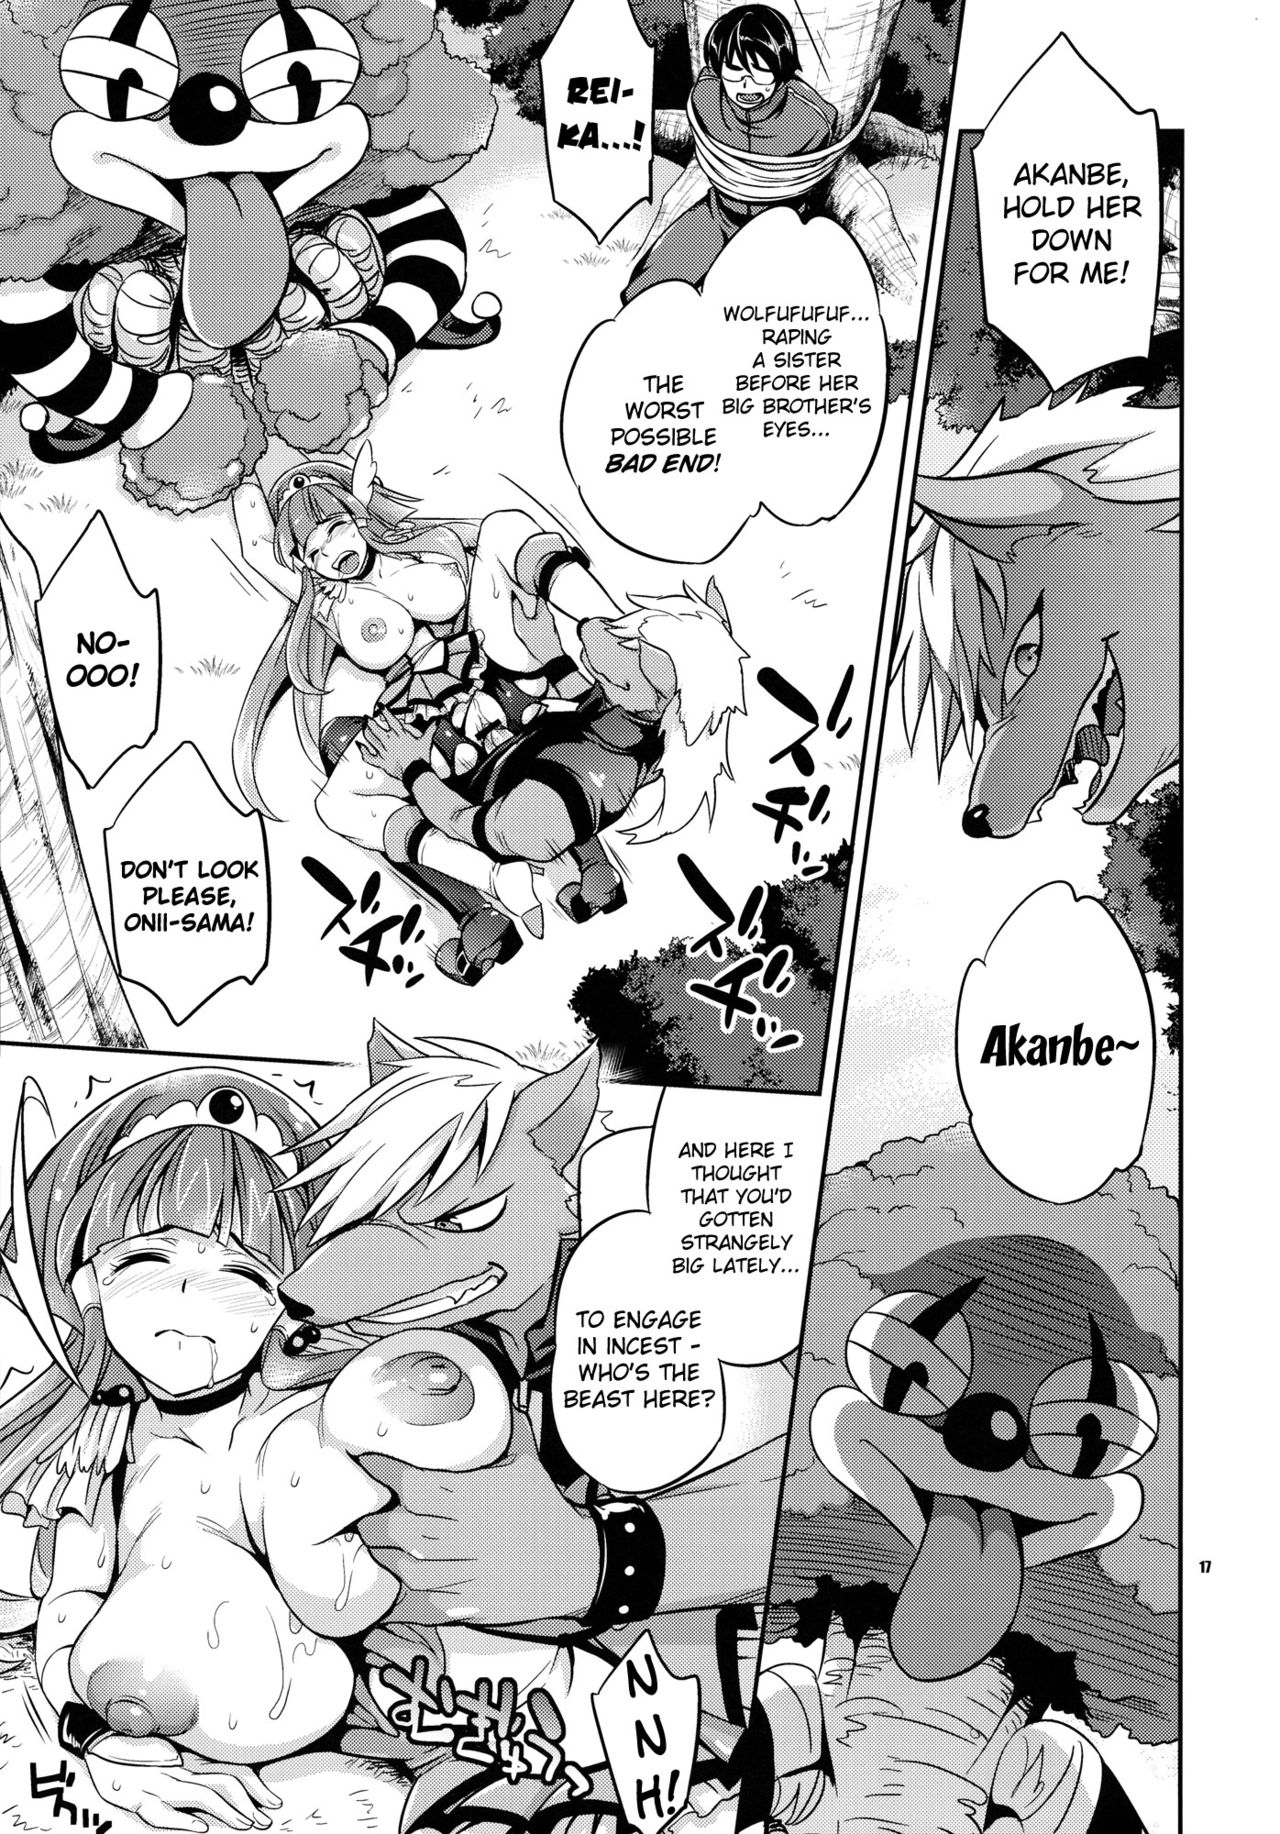 [Crazy9 (Ichitaka)] C9-01 - What I Really Want To Do (Smile Precure) [Eng] {doujin-moe.us} 